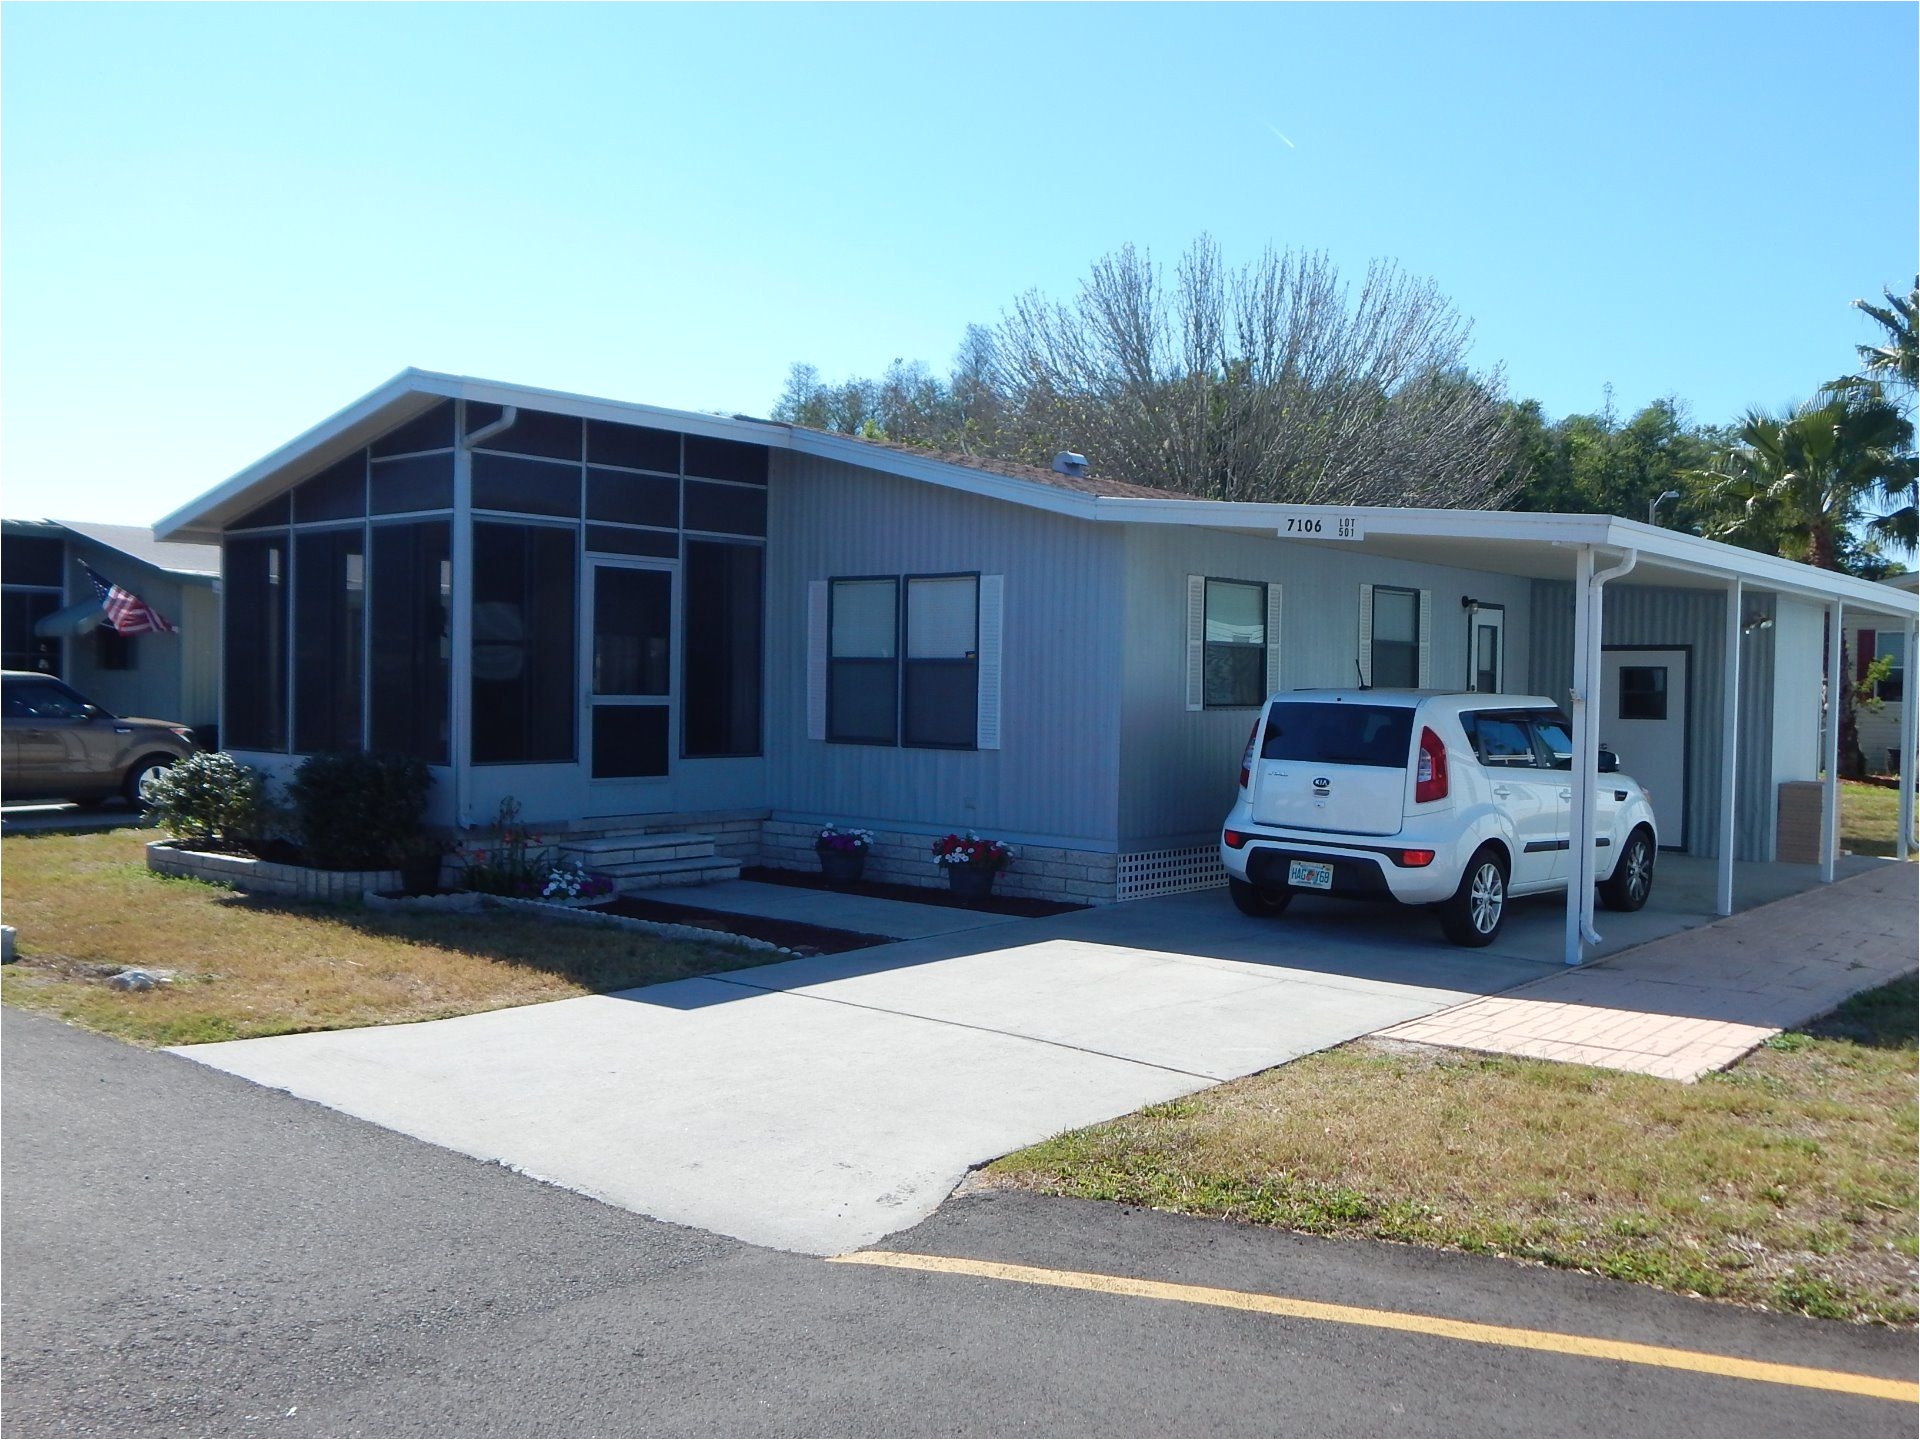 1988 jacobsen mobile manufactured home in new port richey fl via mhvillage com